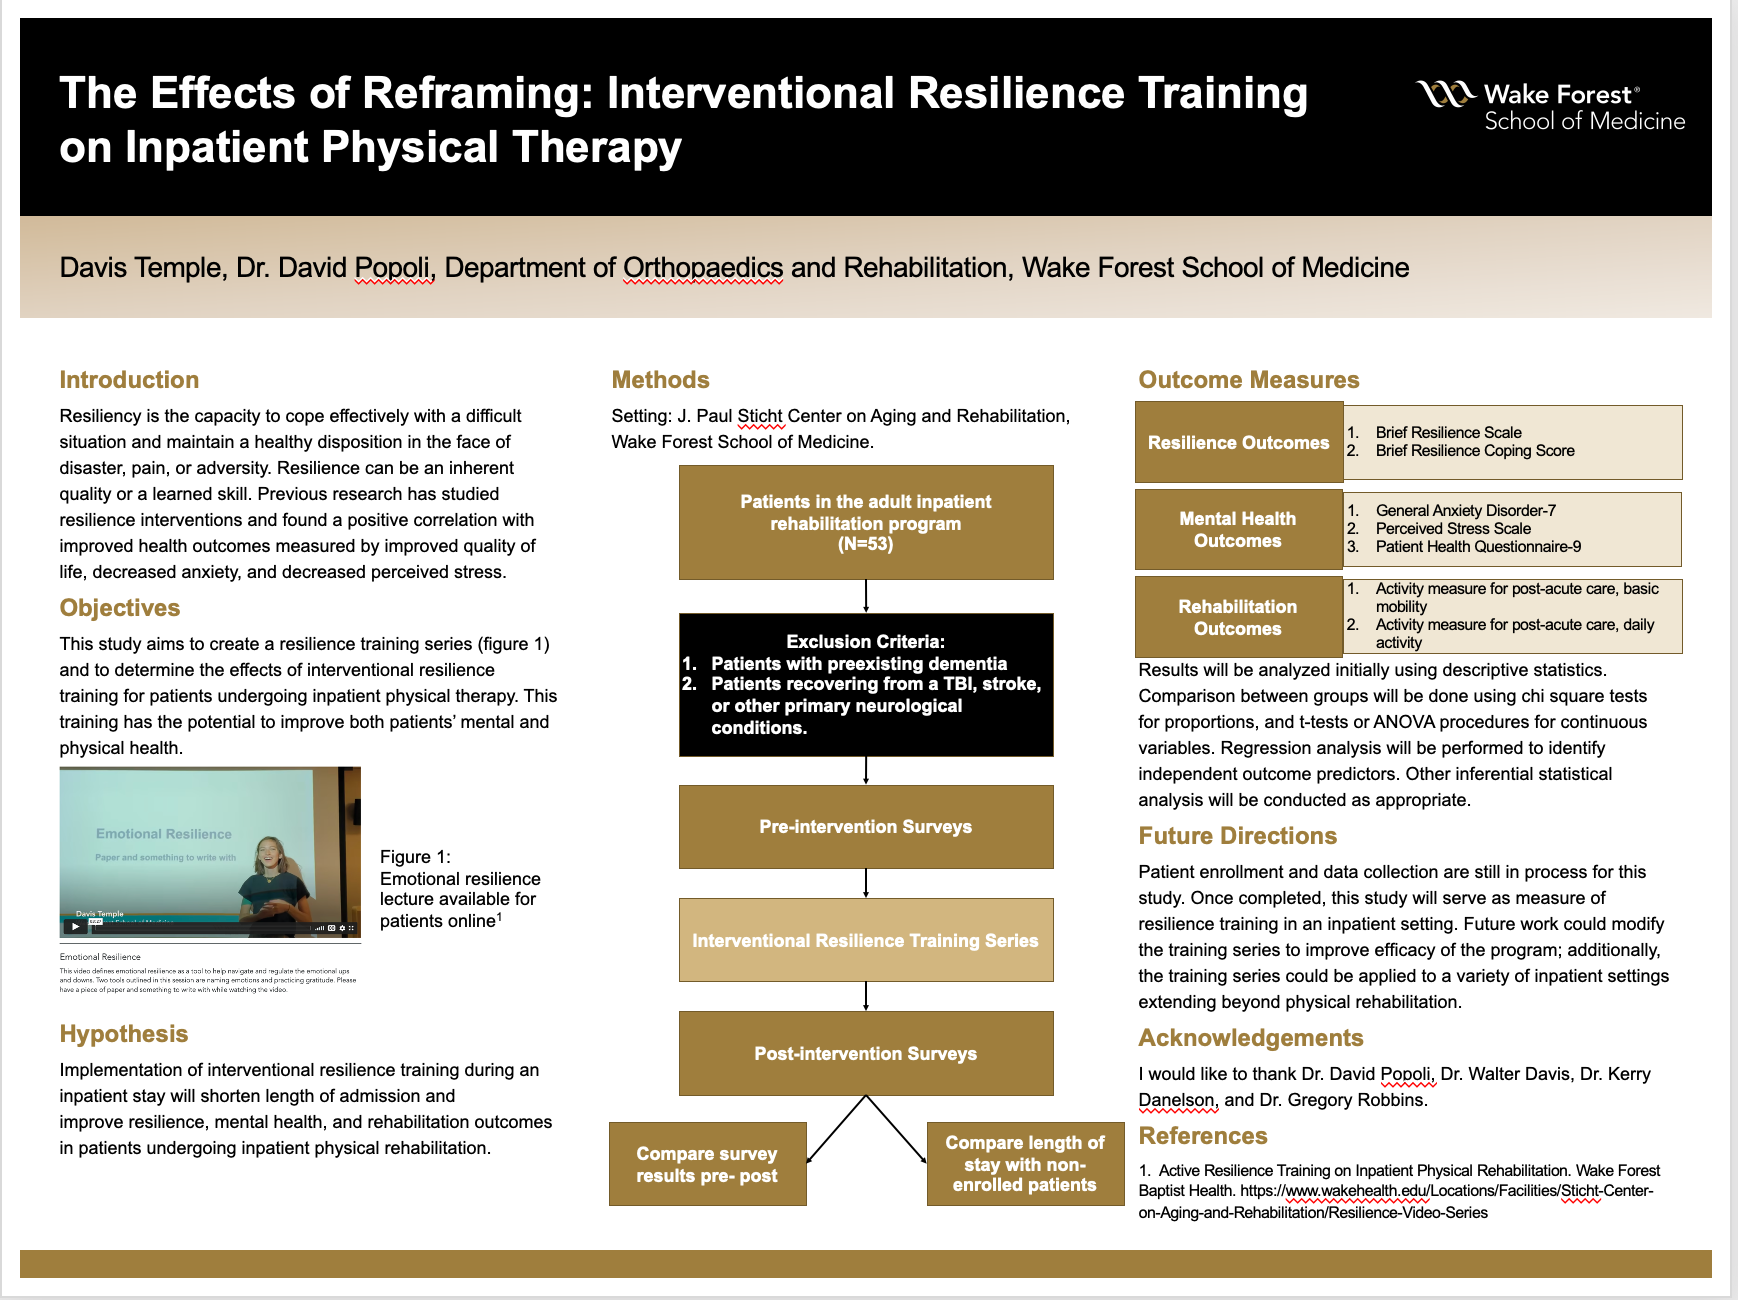 Showcase Image for The Effects of Reframing: Interventional Resilience Training on Inpatient Physical Therapy